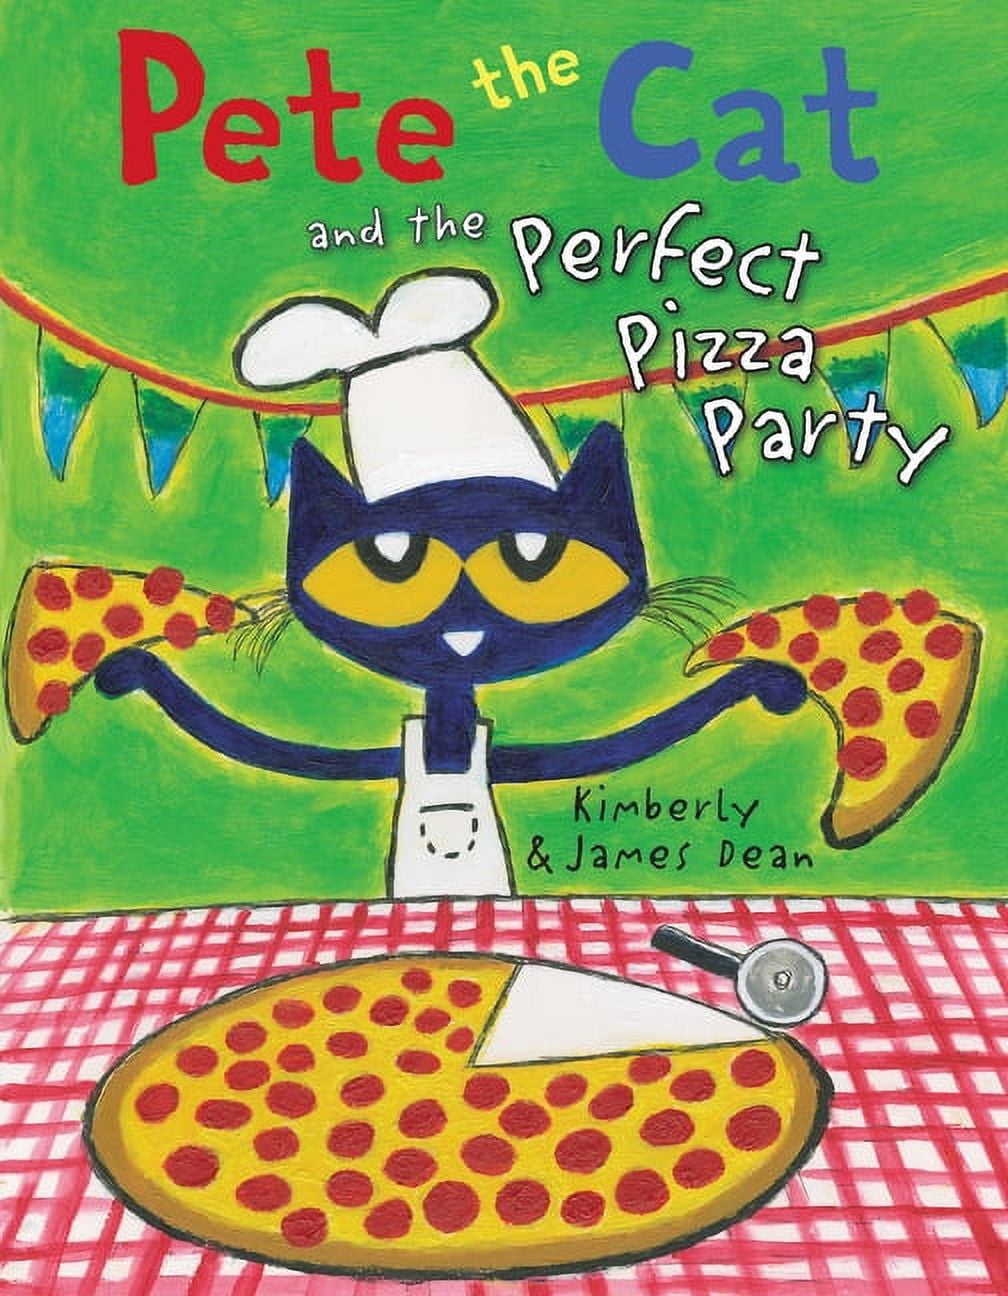 Pete the Cat Books - Browse the Complete List